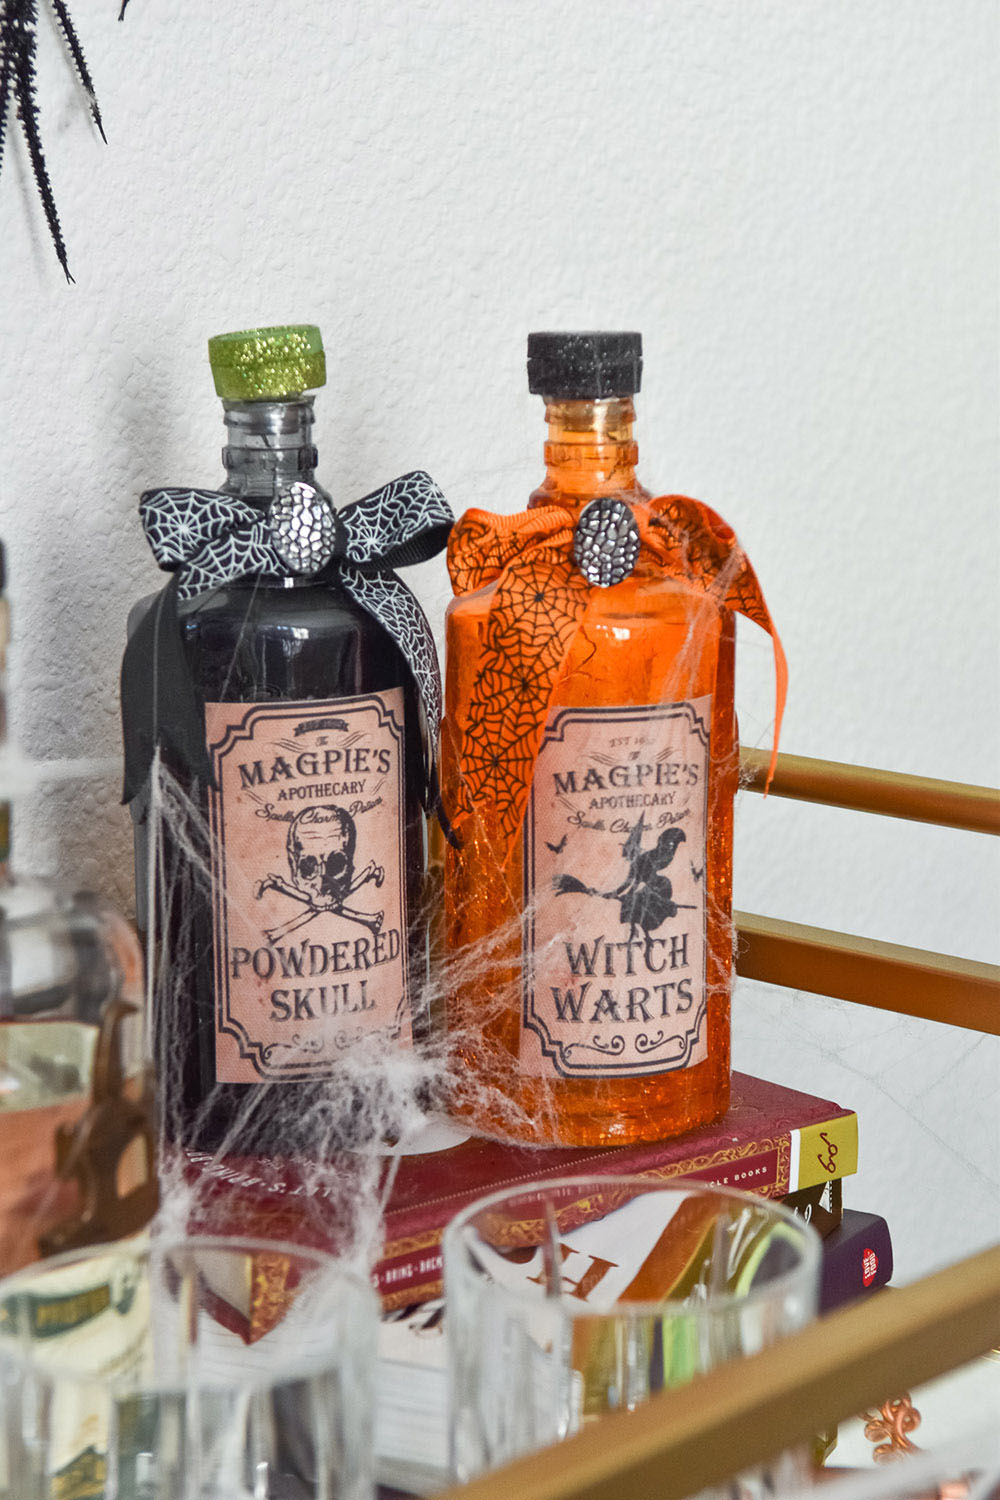 A beverage cart decorated with Halloween crackle glass bottles.